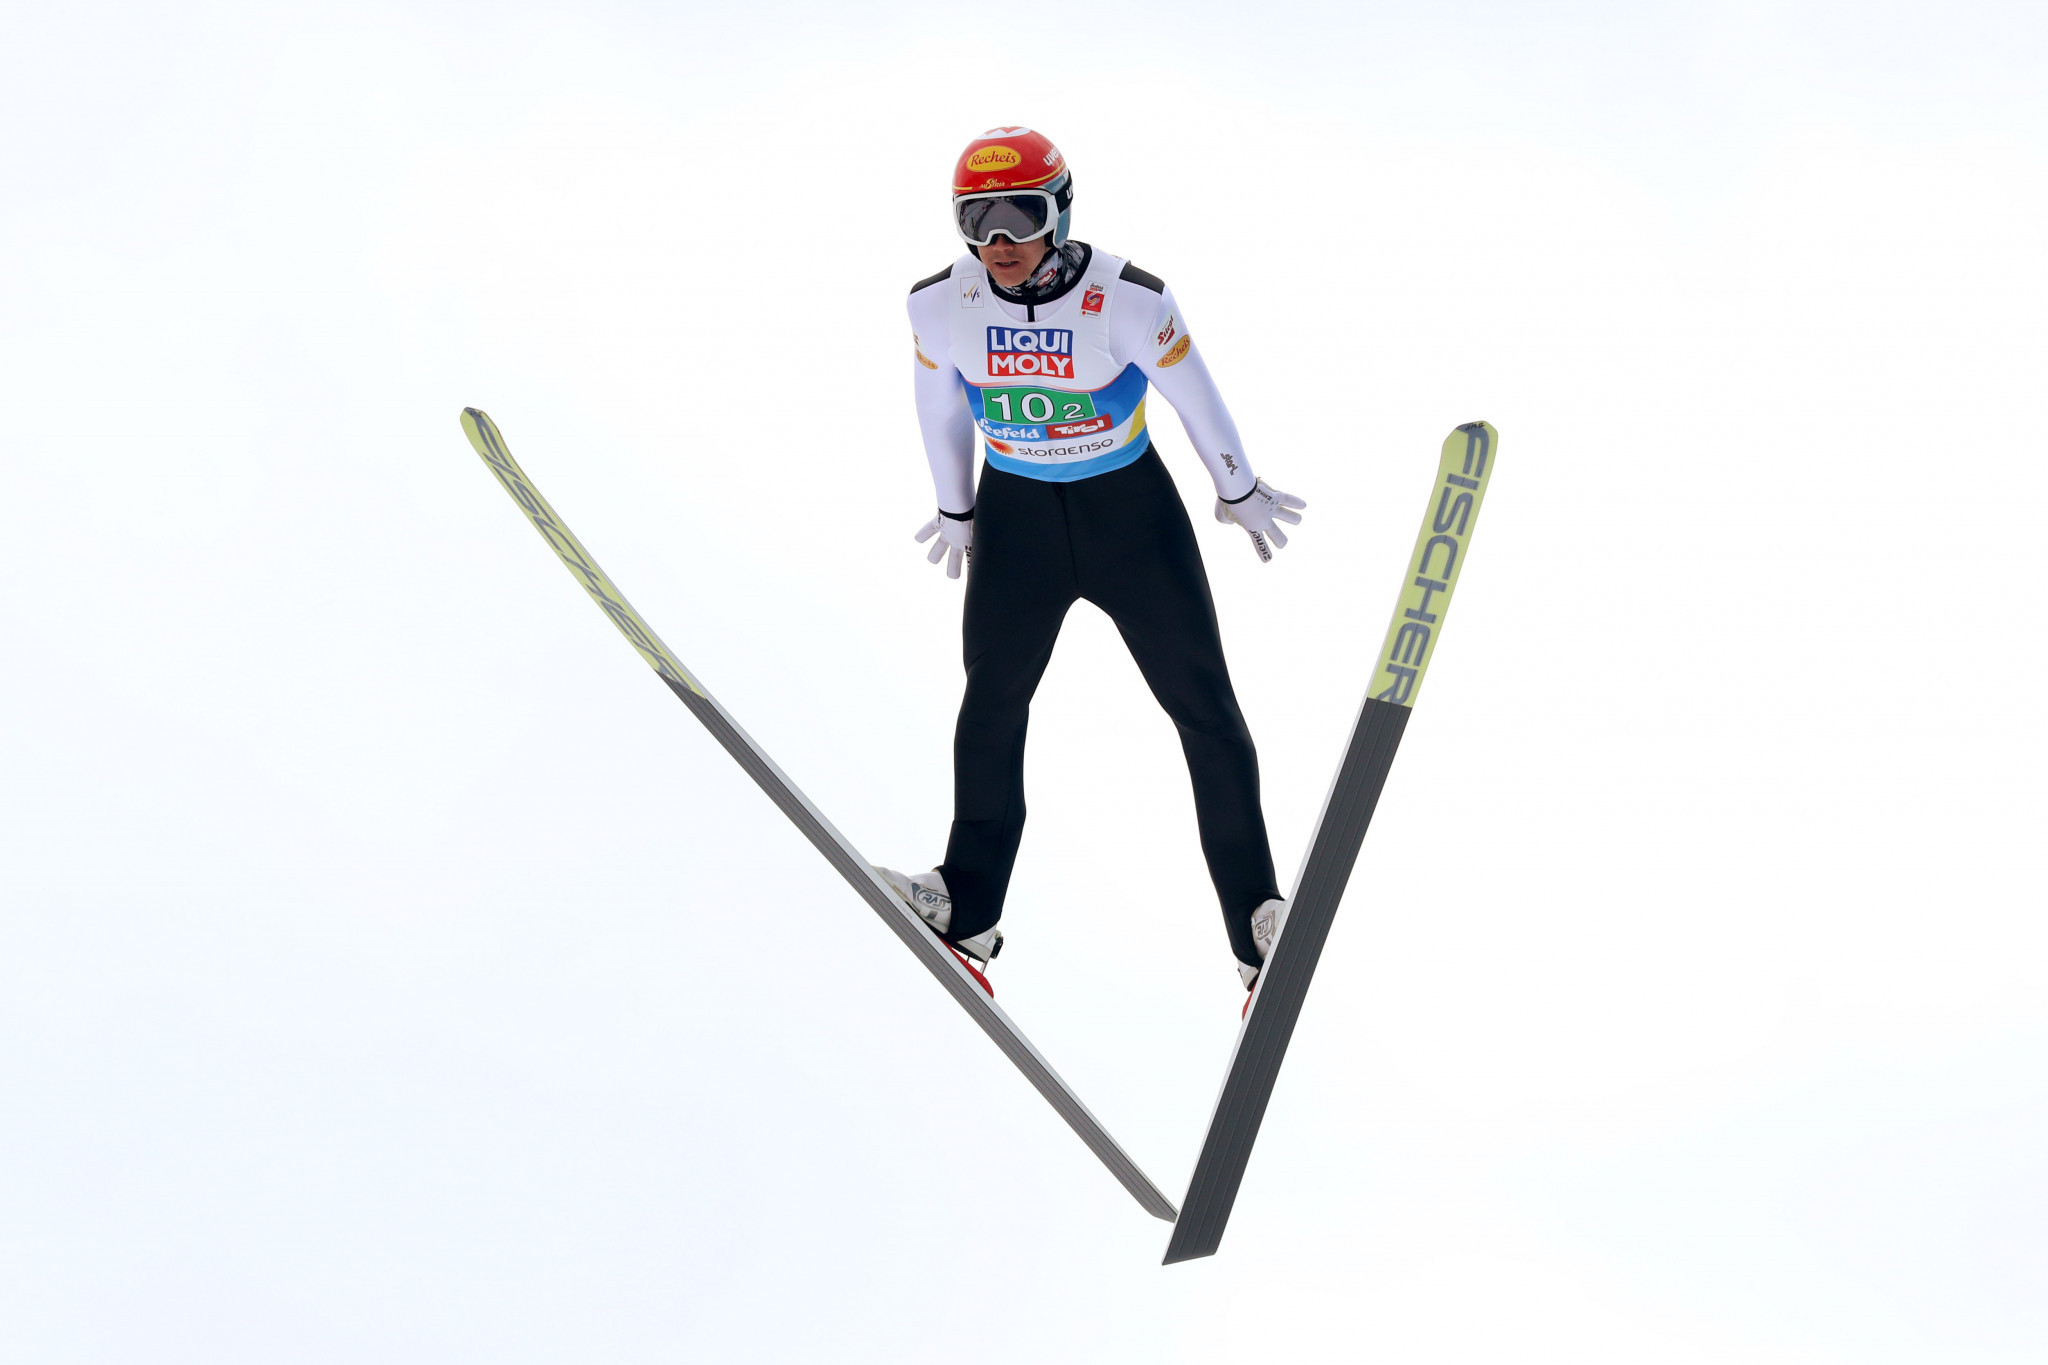 Olympic bronze medallist Seidl returns to Nordic combined training following injury